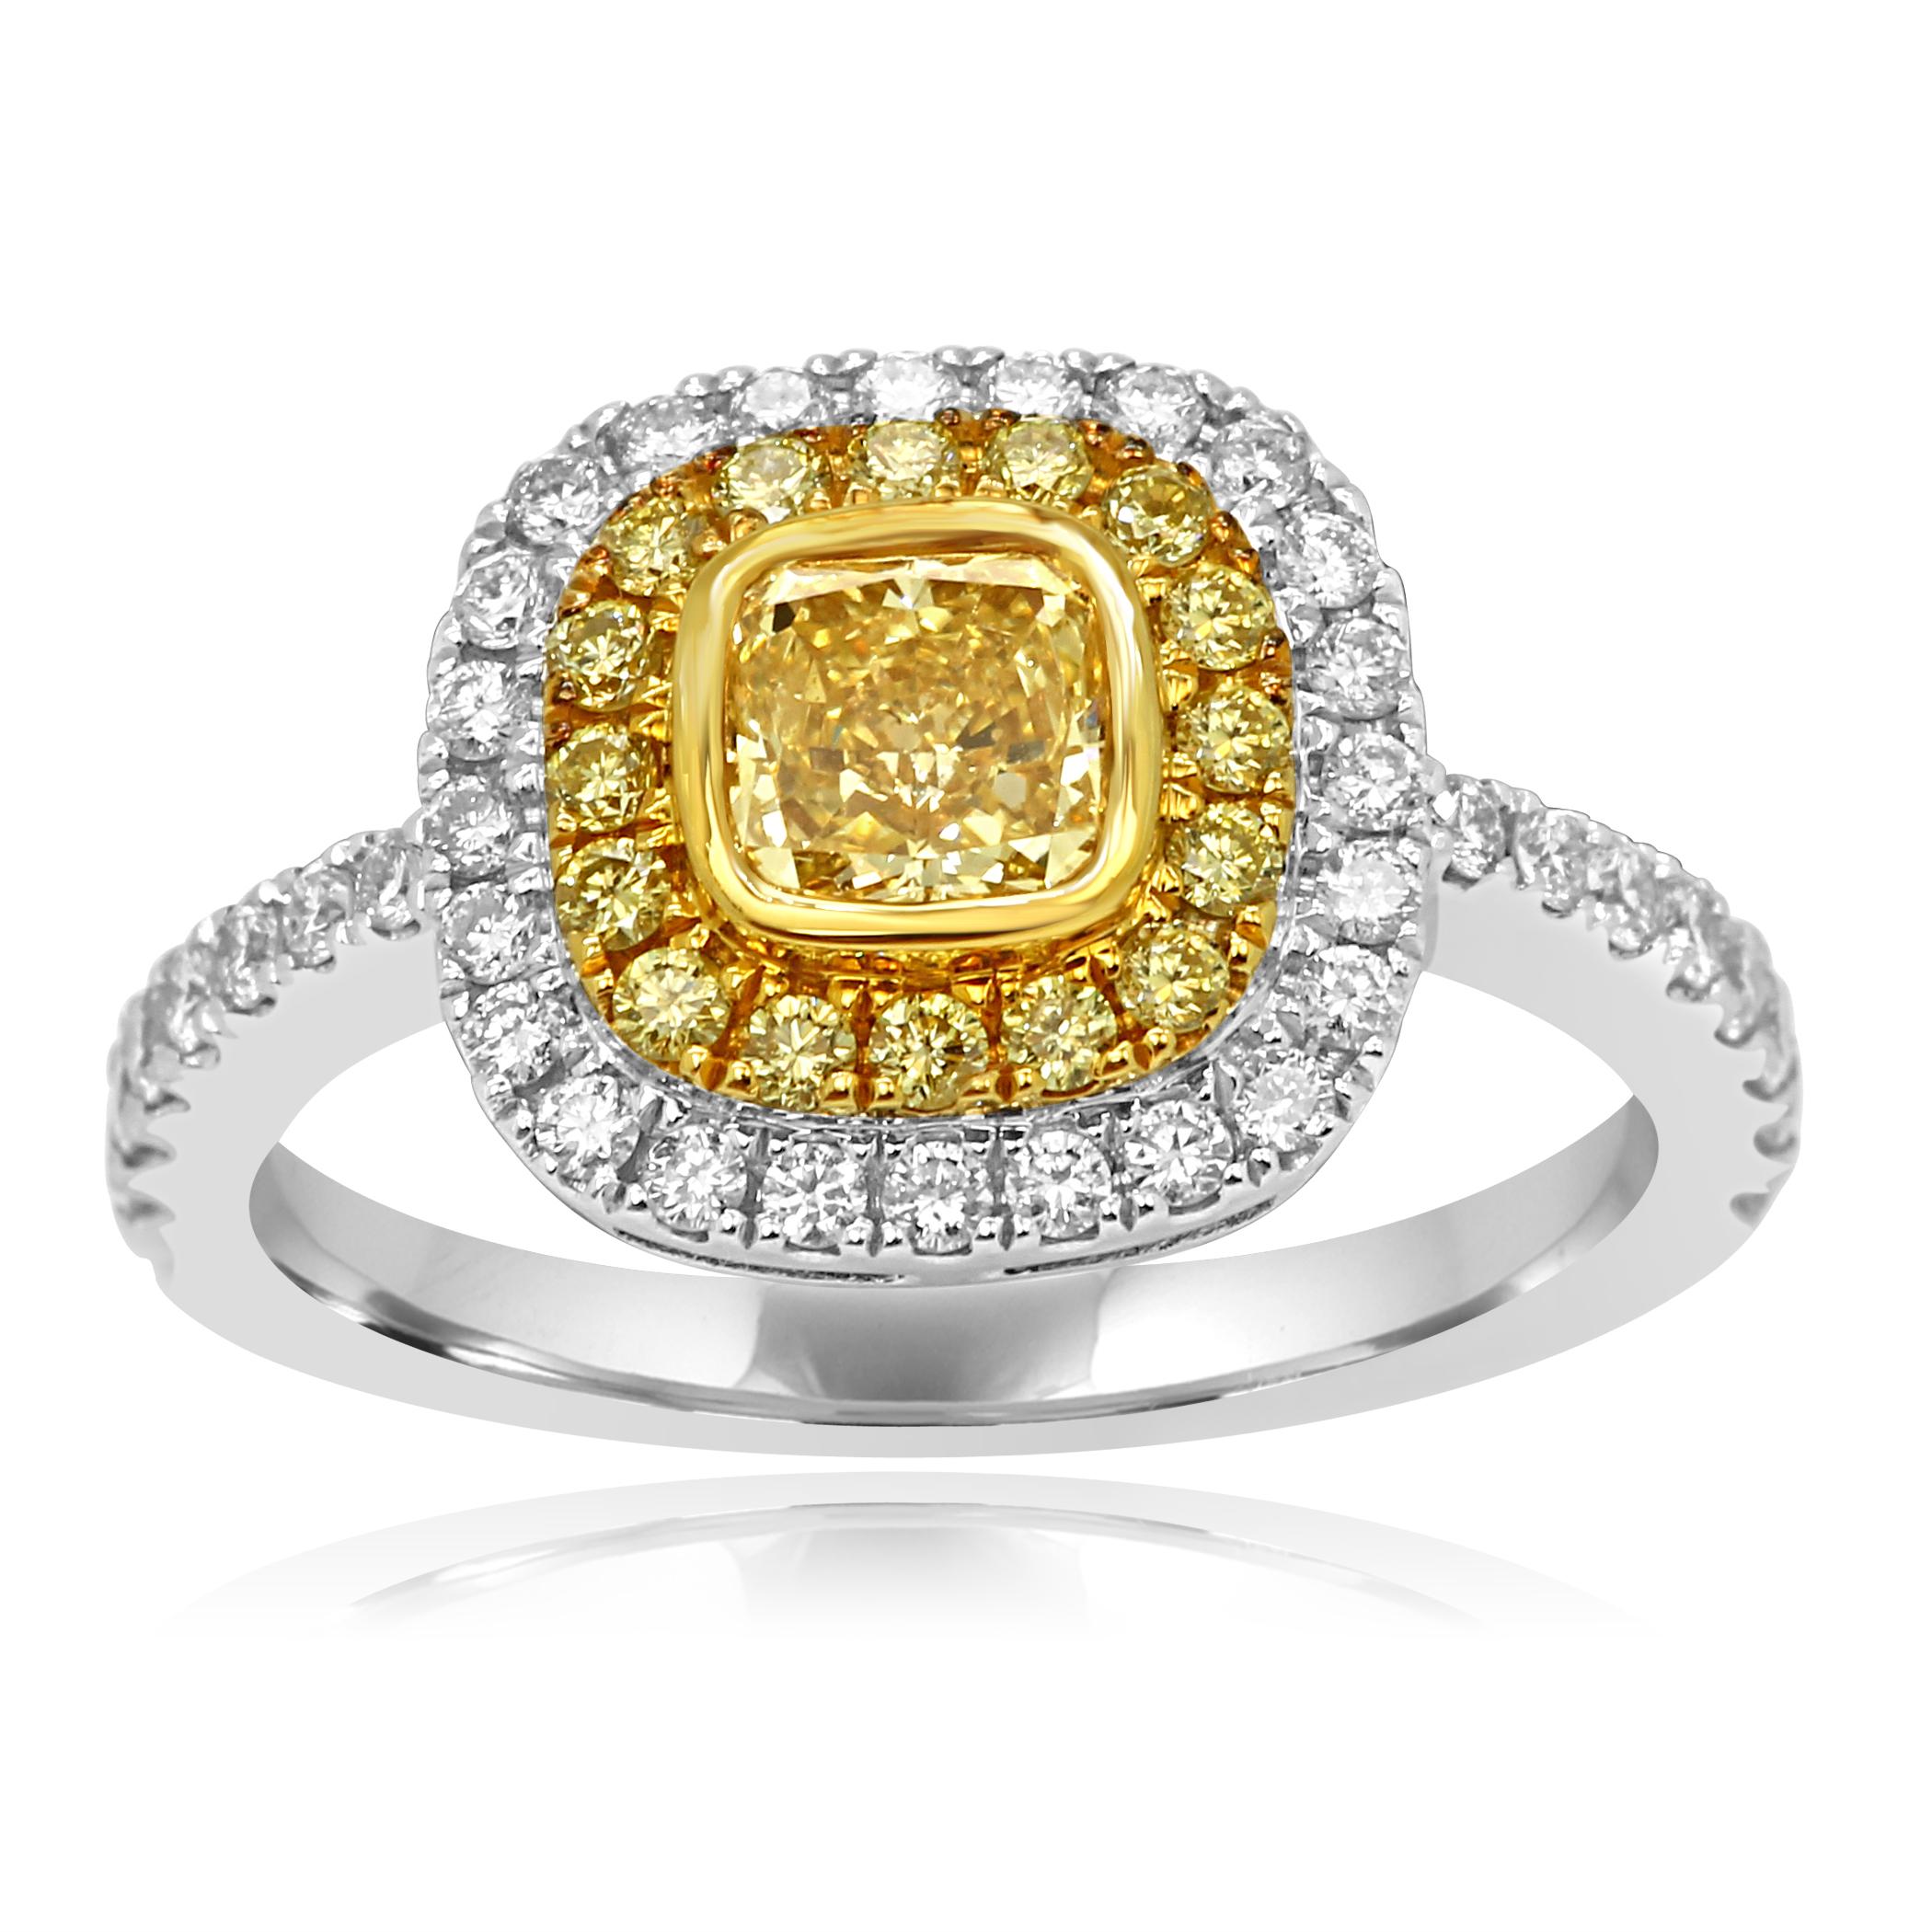 Natural Fancy Yellow Diamond Cushion 0.58 Carat encircled in double Halo of natural yellow diamond round 0.19 Carat white diamond round 0.50 carat in 18K White and Yellow Gold Bridal Fashion Ring.

Style available in different price ranges. Prices